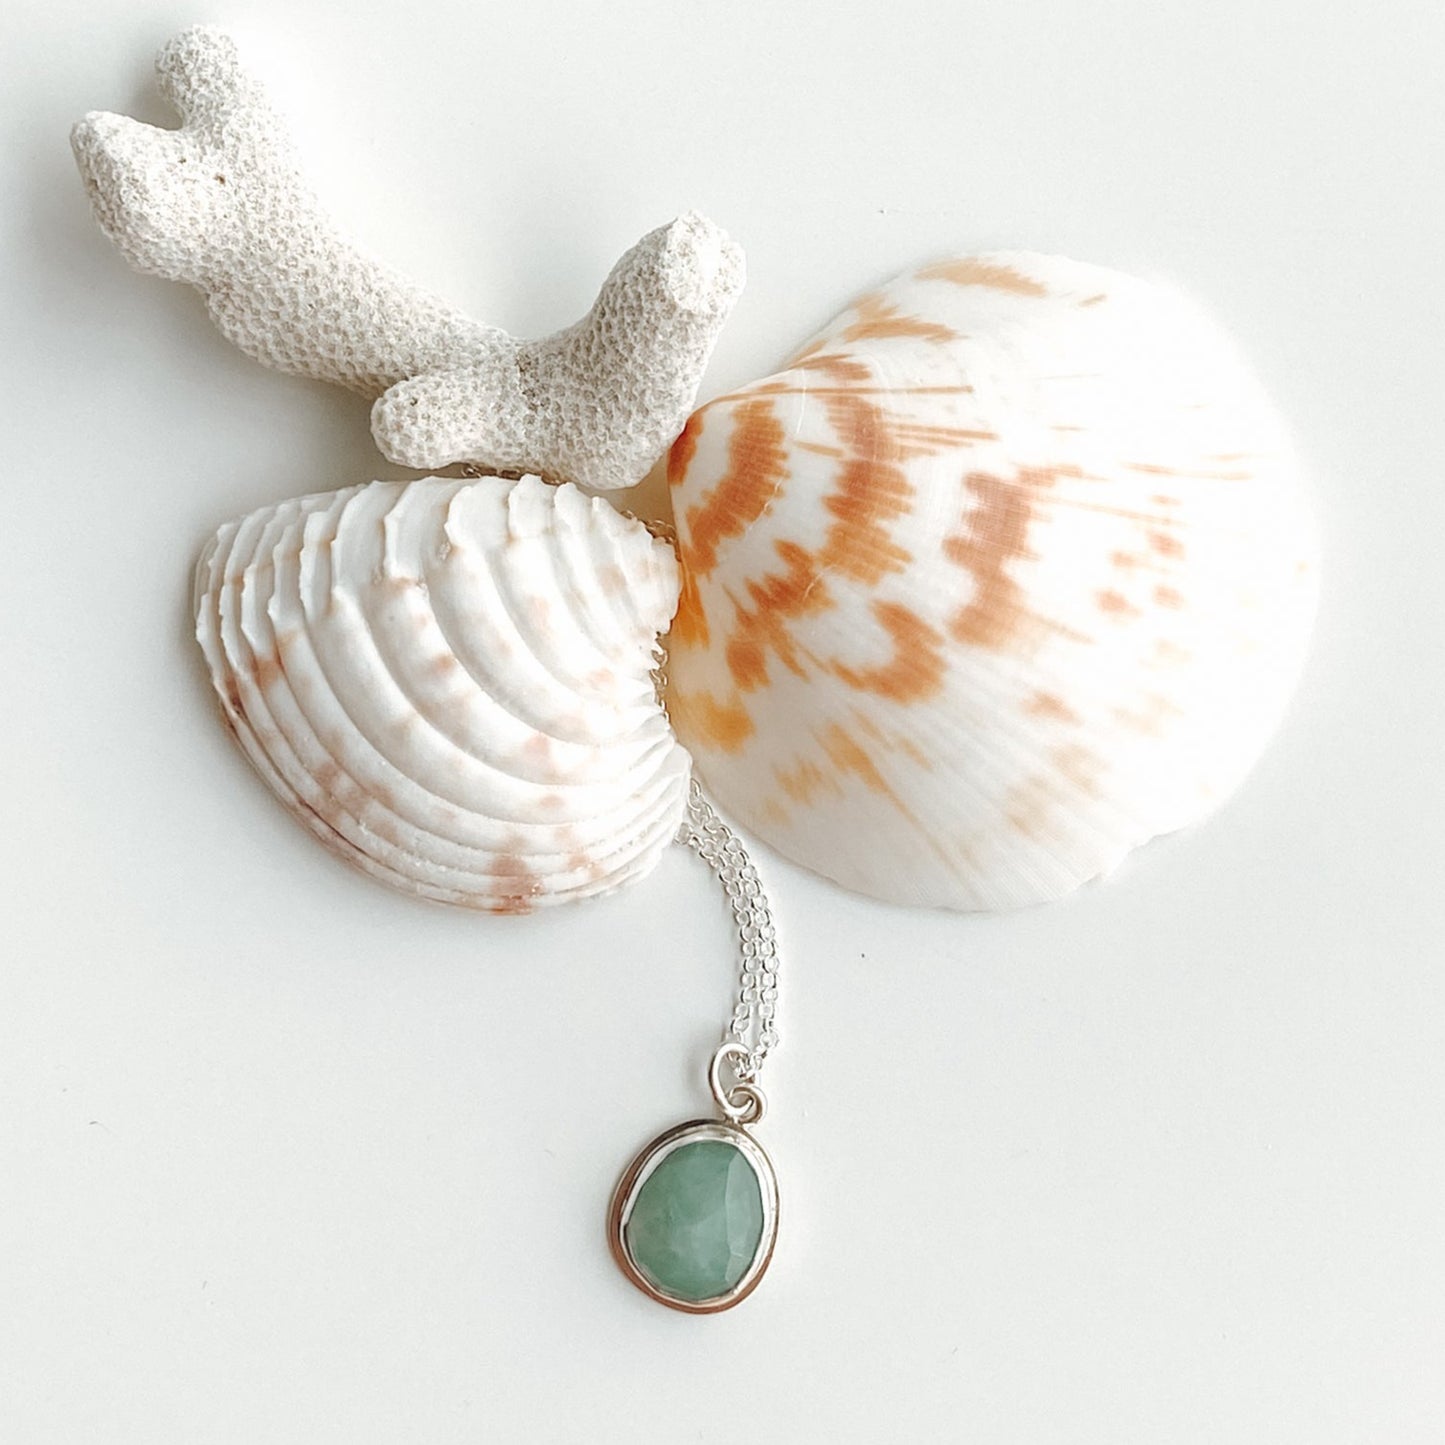 Flatlay view of pale green aqua gandiderite  and silver pendant displayed with two seashells and and piece of white coral on a white background.